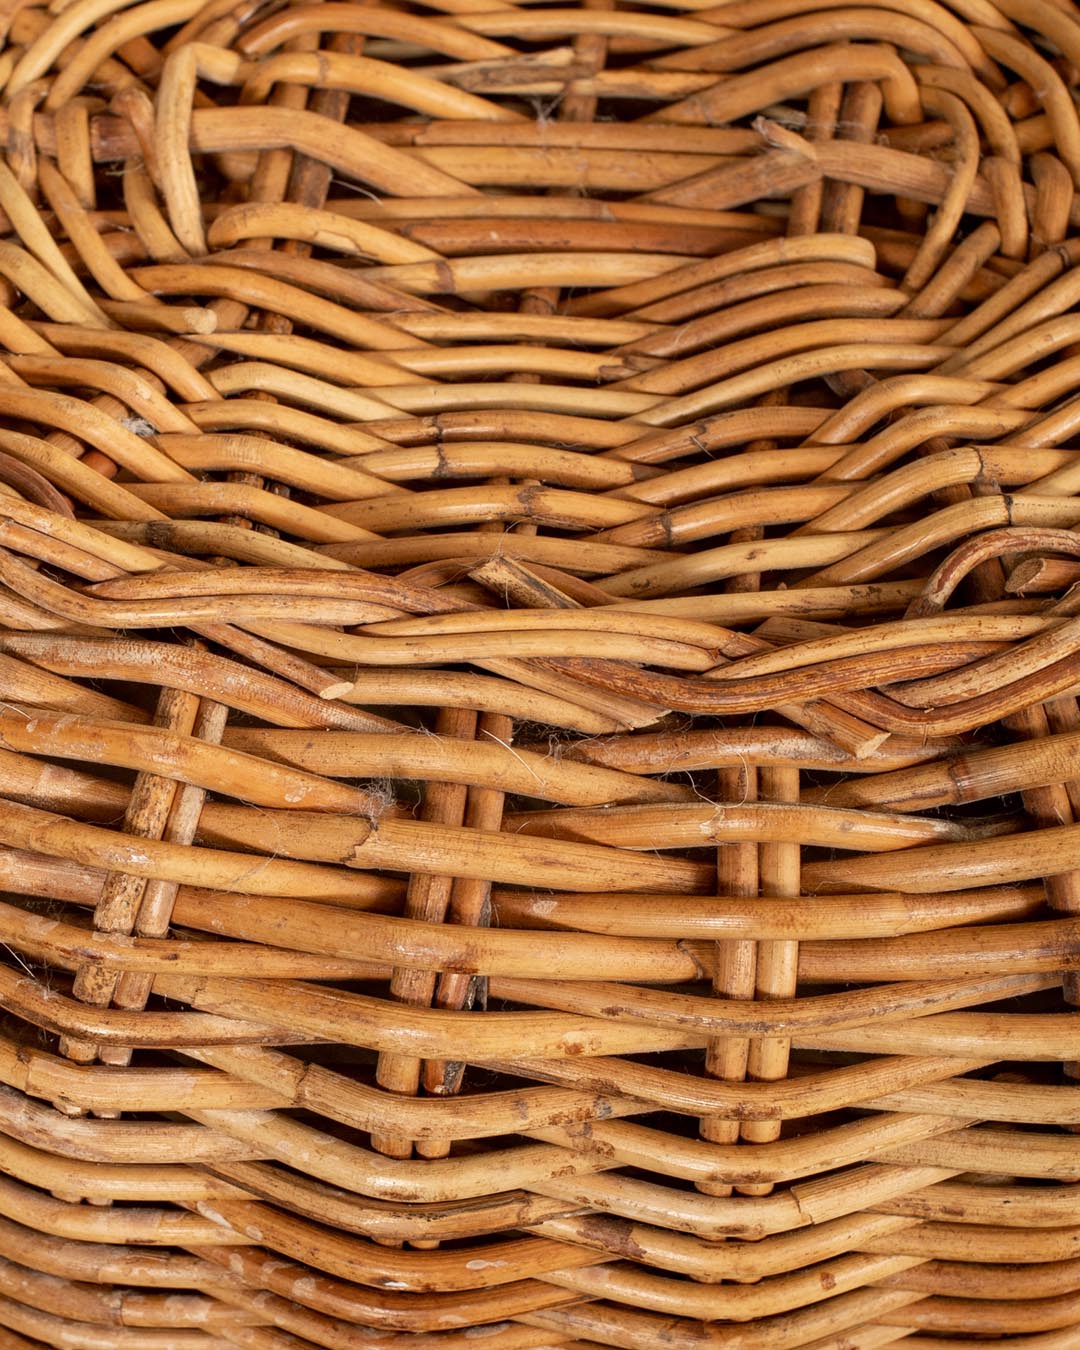 Wicker baskets add both beauty and functionality to a home and they're one of my favourite home decor items ever. They can also collect a lot of dust and grime over the years when you look at them closely! Here's how to clean wicker baskets!